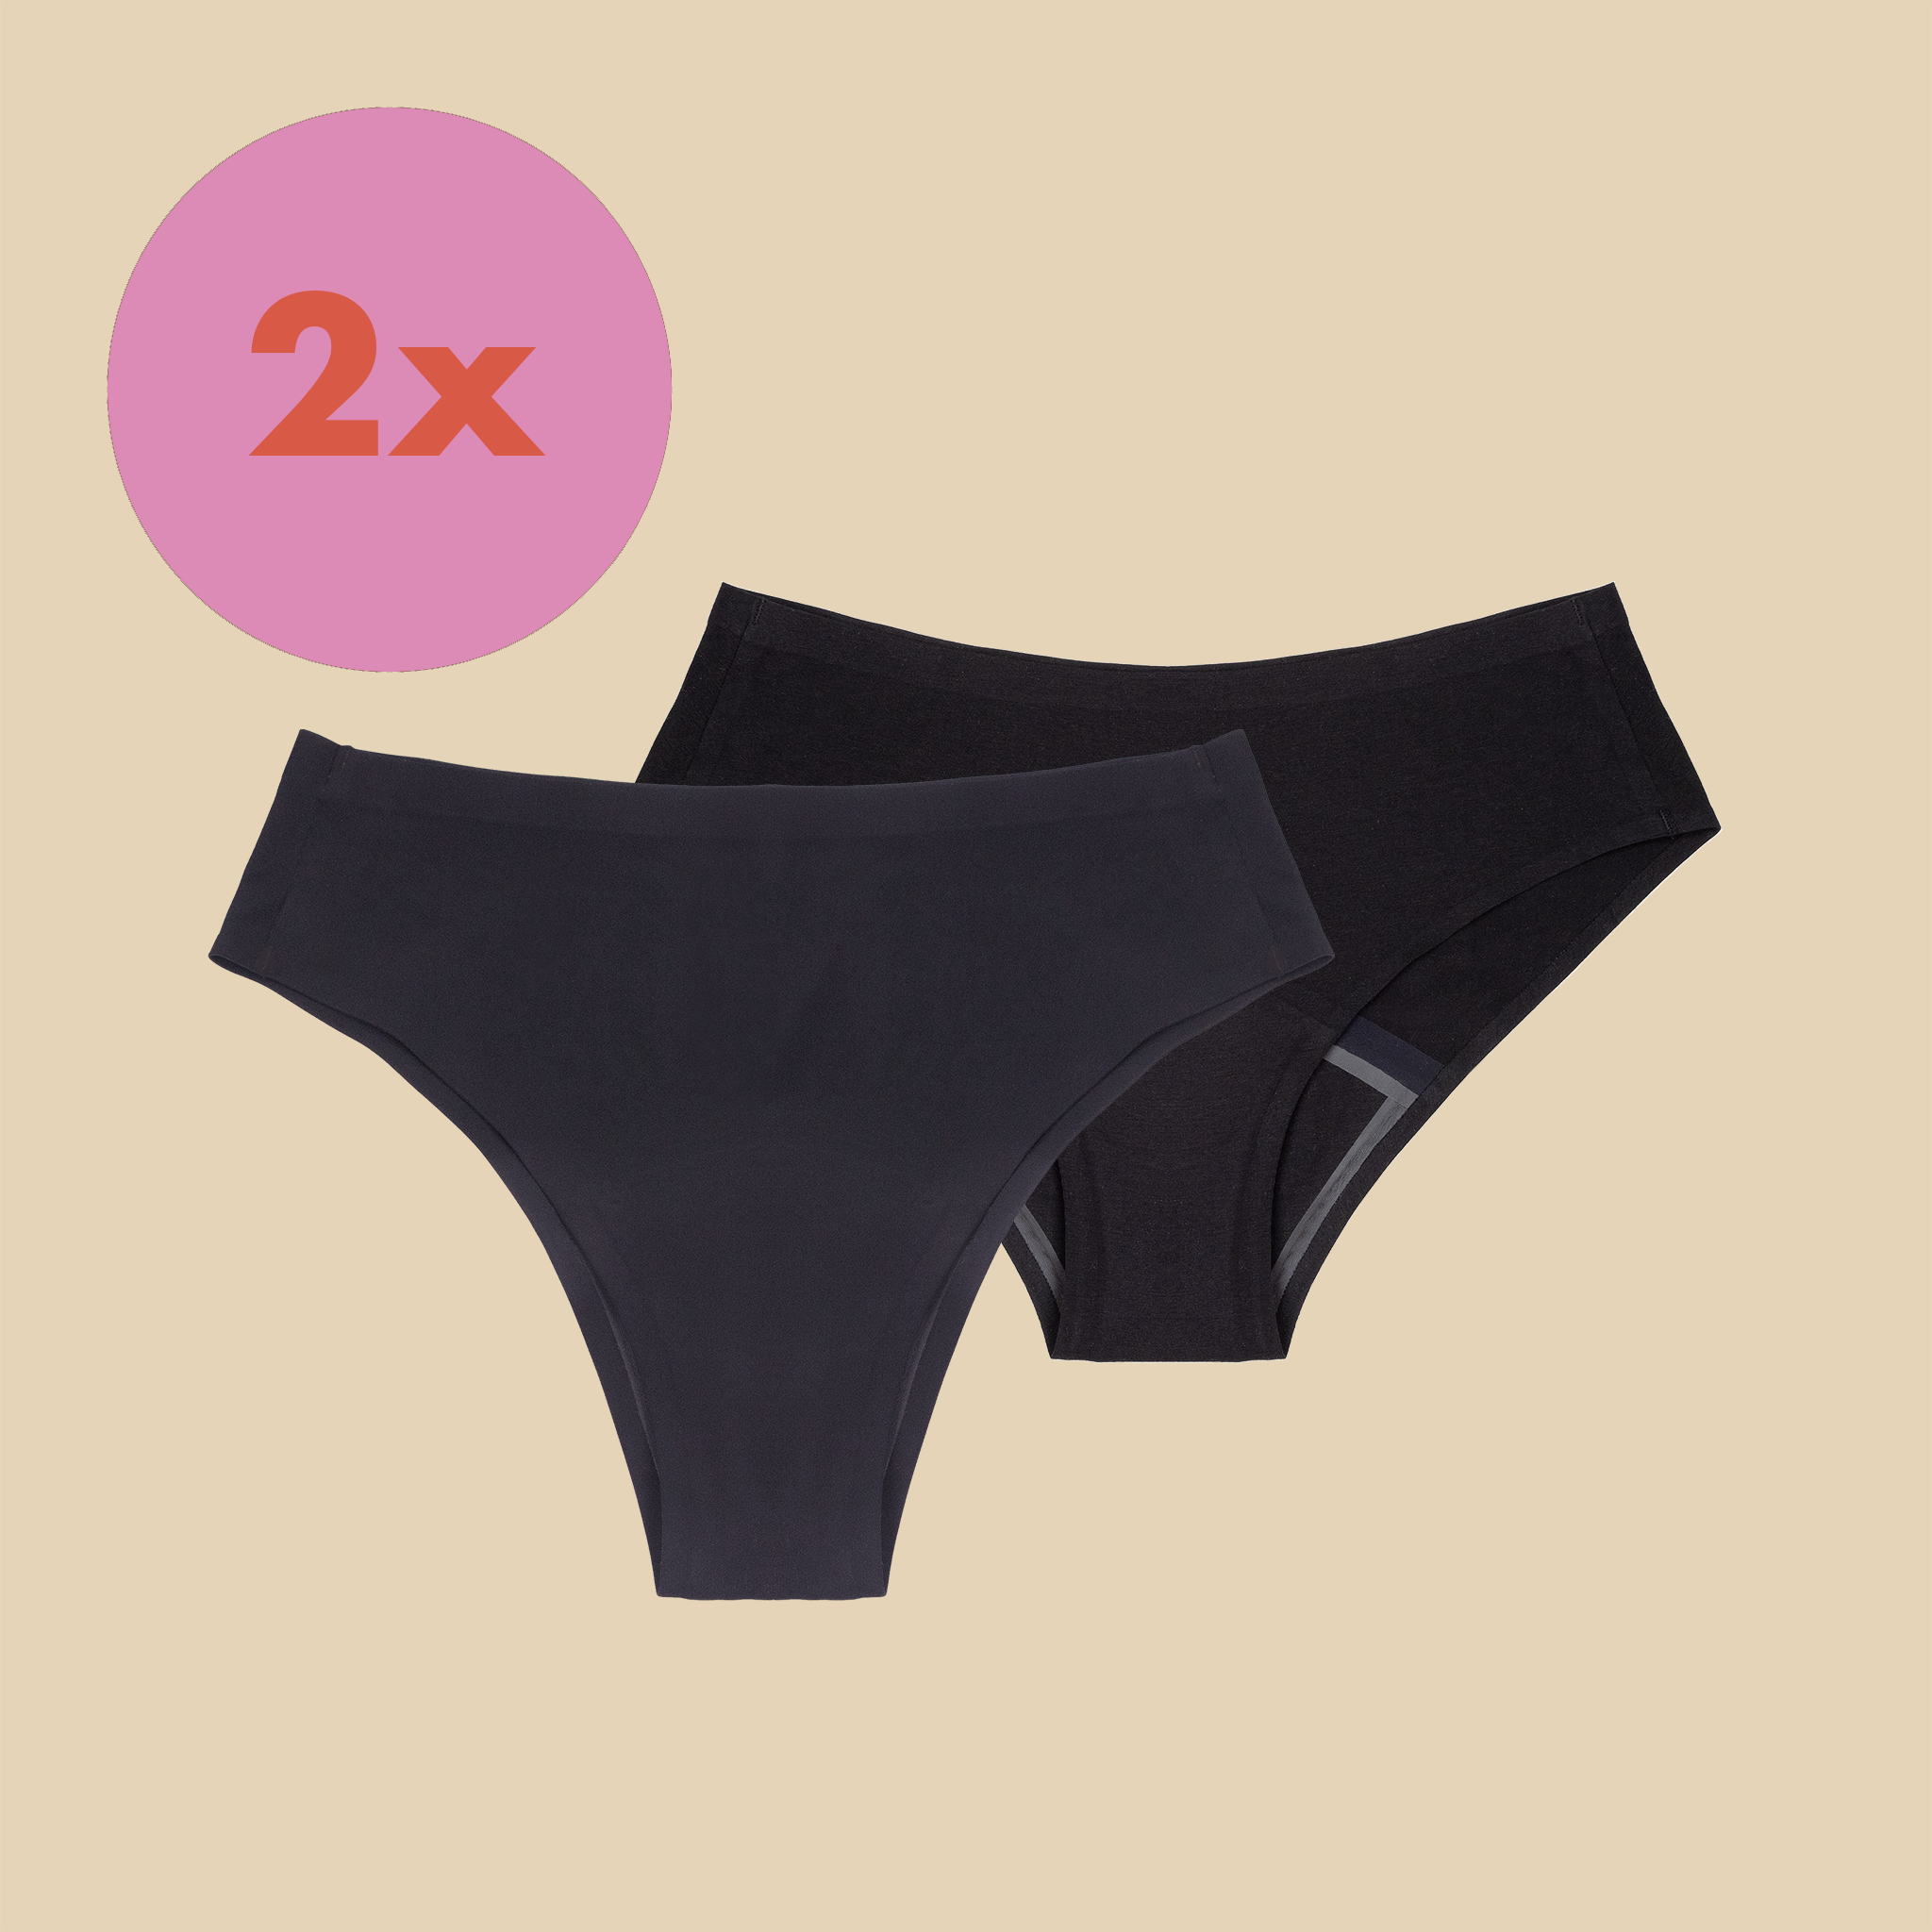 dais period underwear multipack with 2 units. One is the cheeky dais period underwear made of nylon and the other is the hipster dais period underwear made of organic cotton.